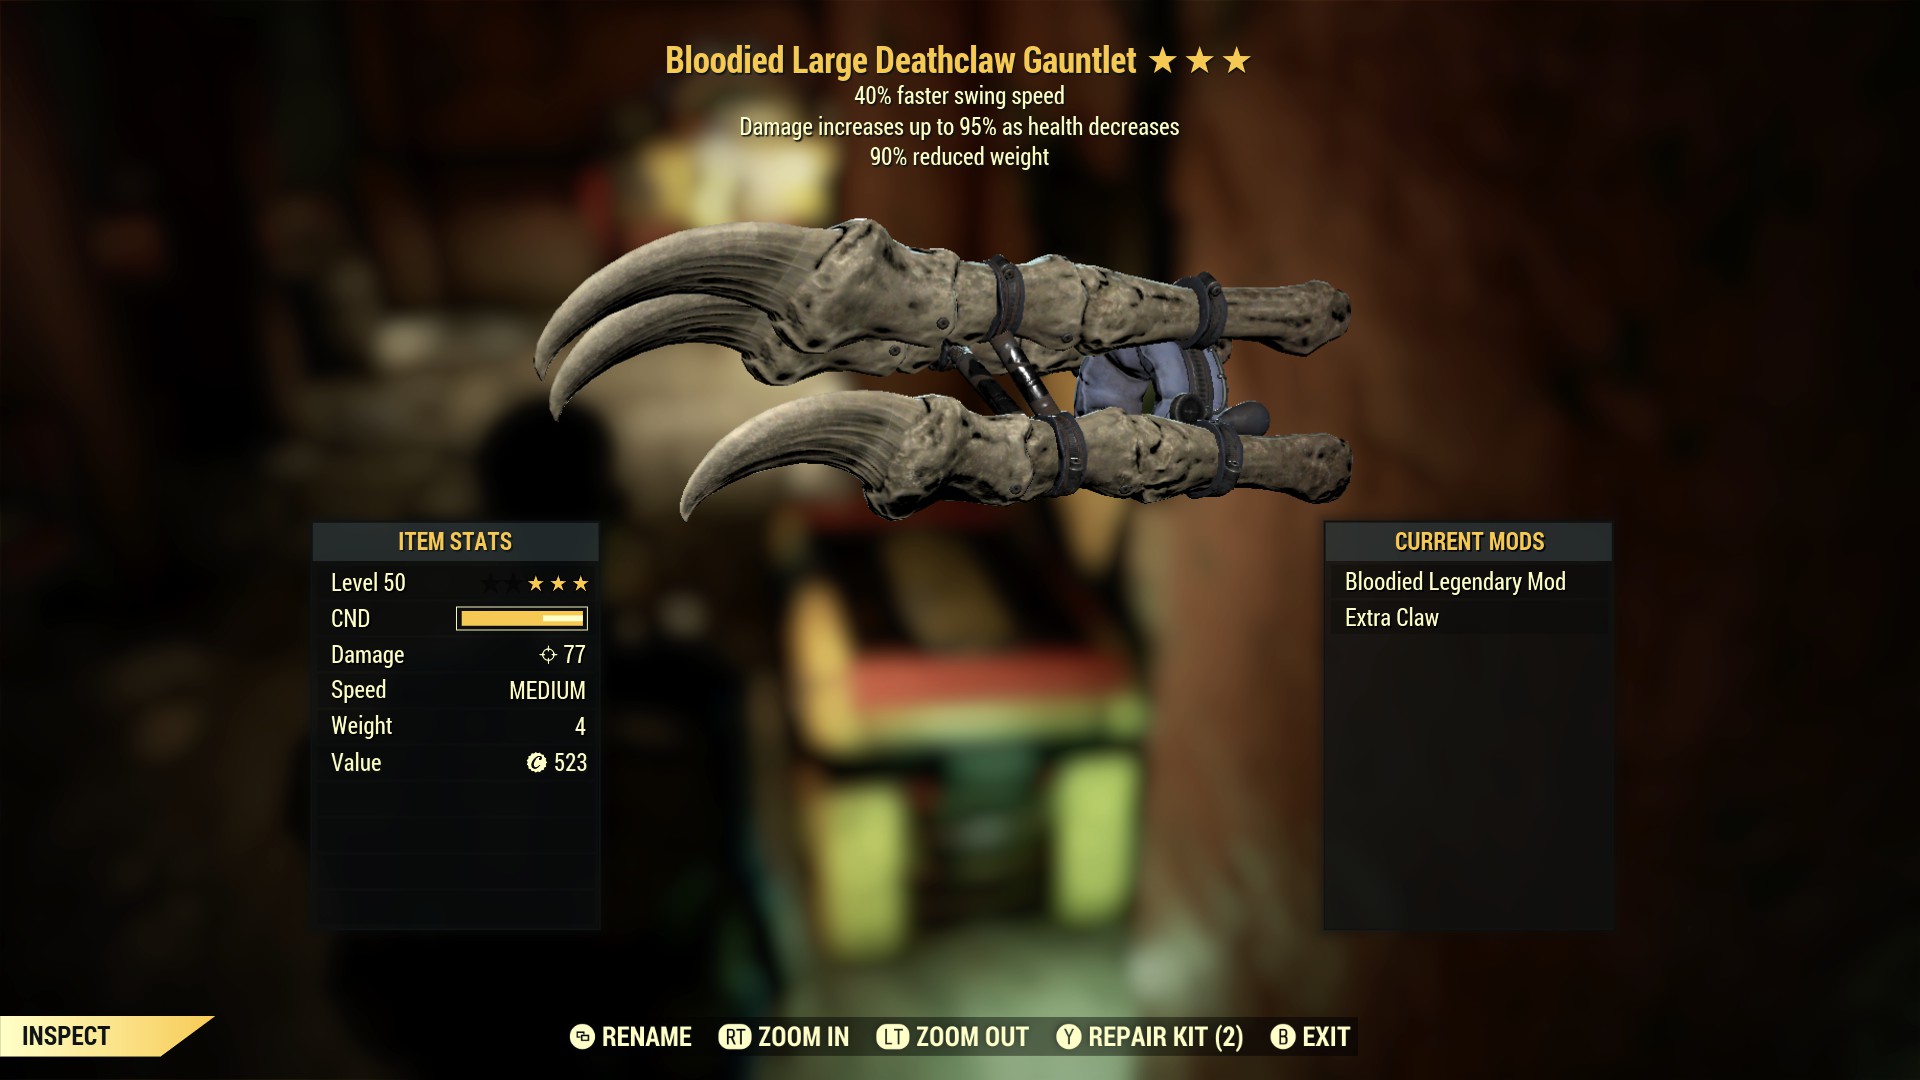 Bloodied Large Deathclaw Gauntlet